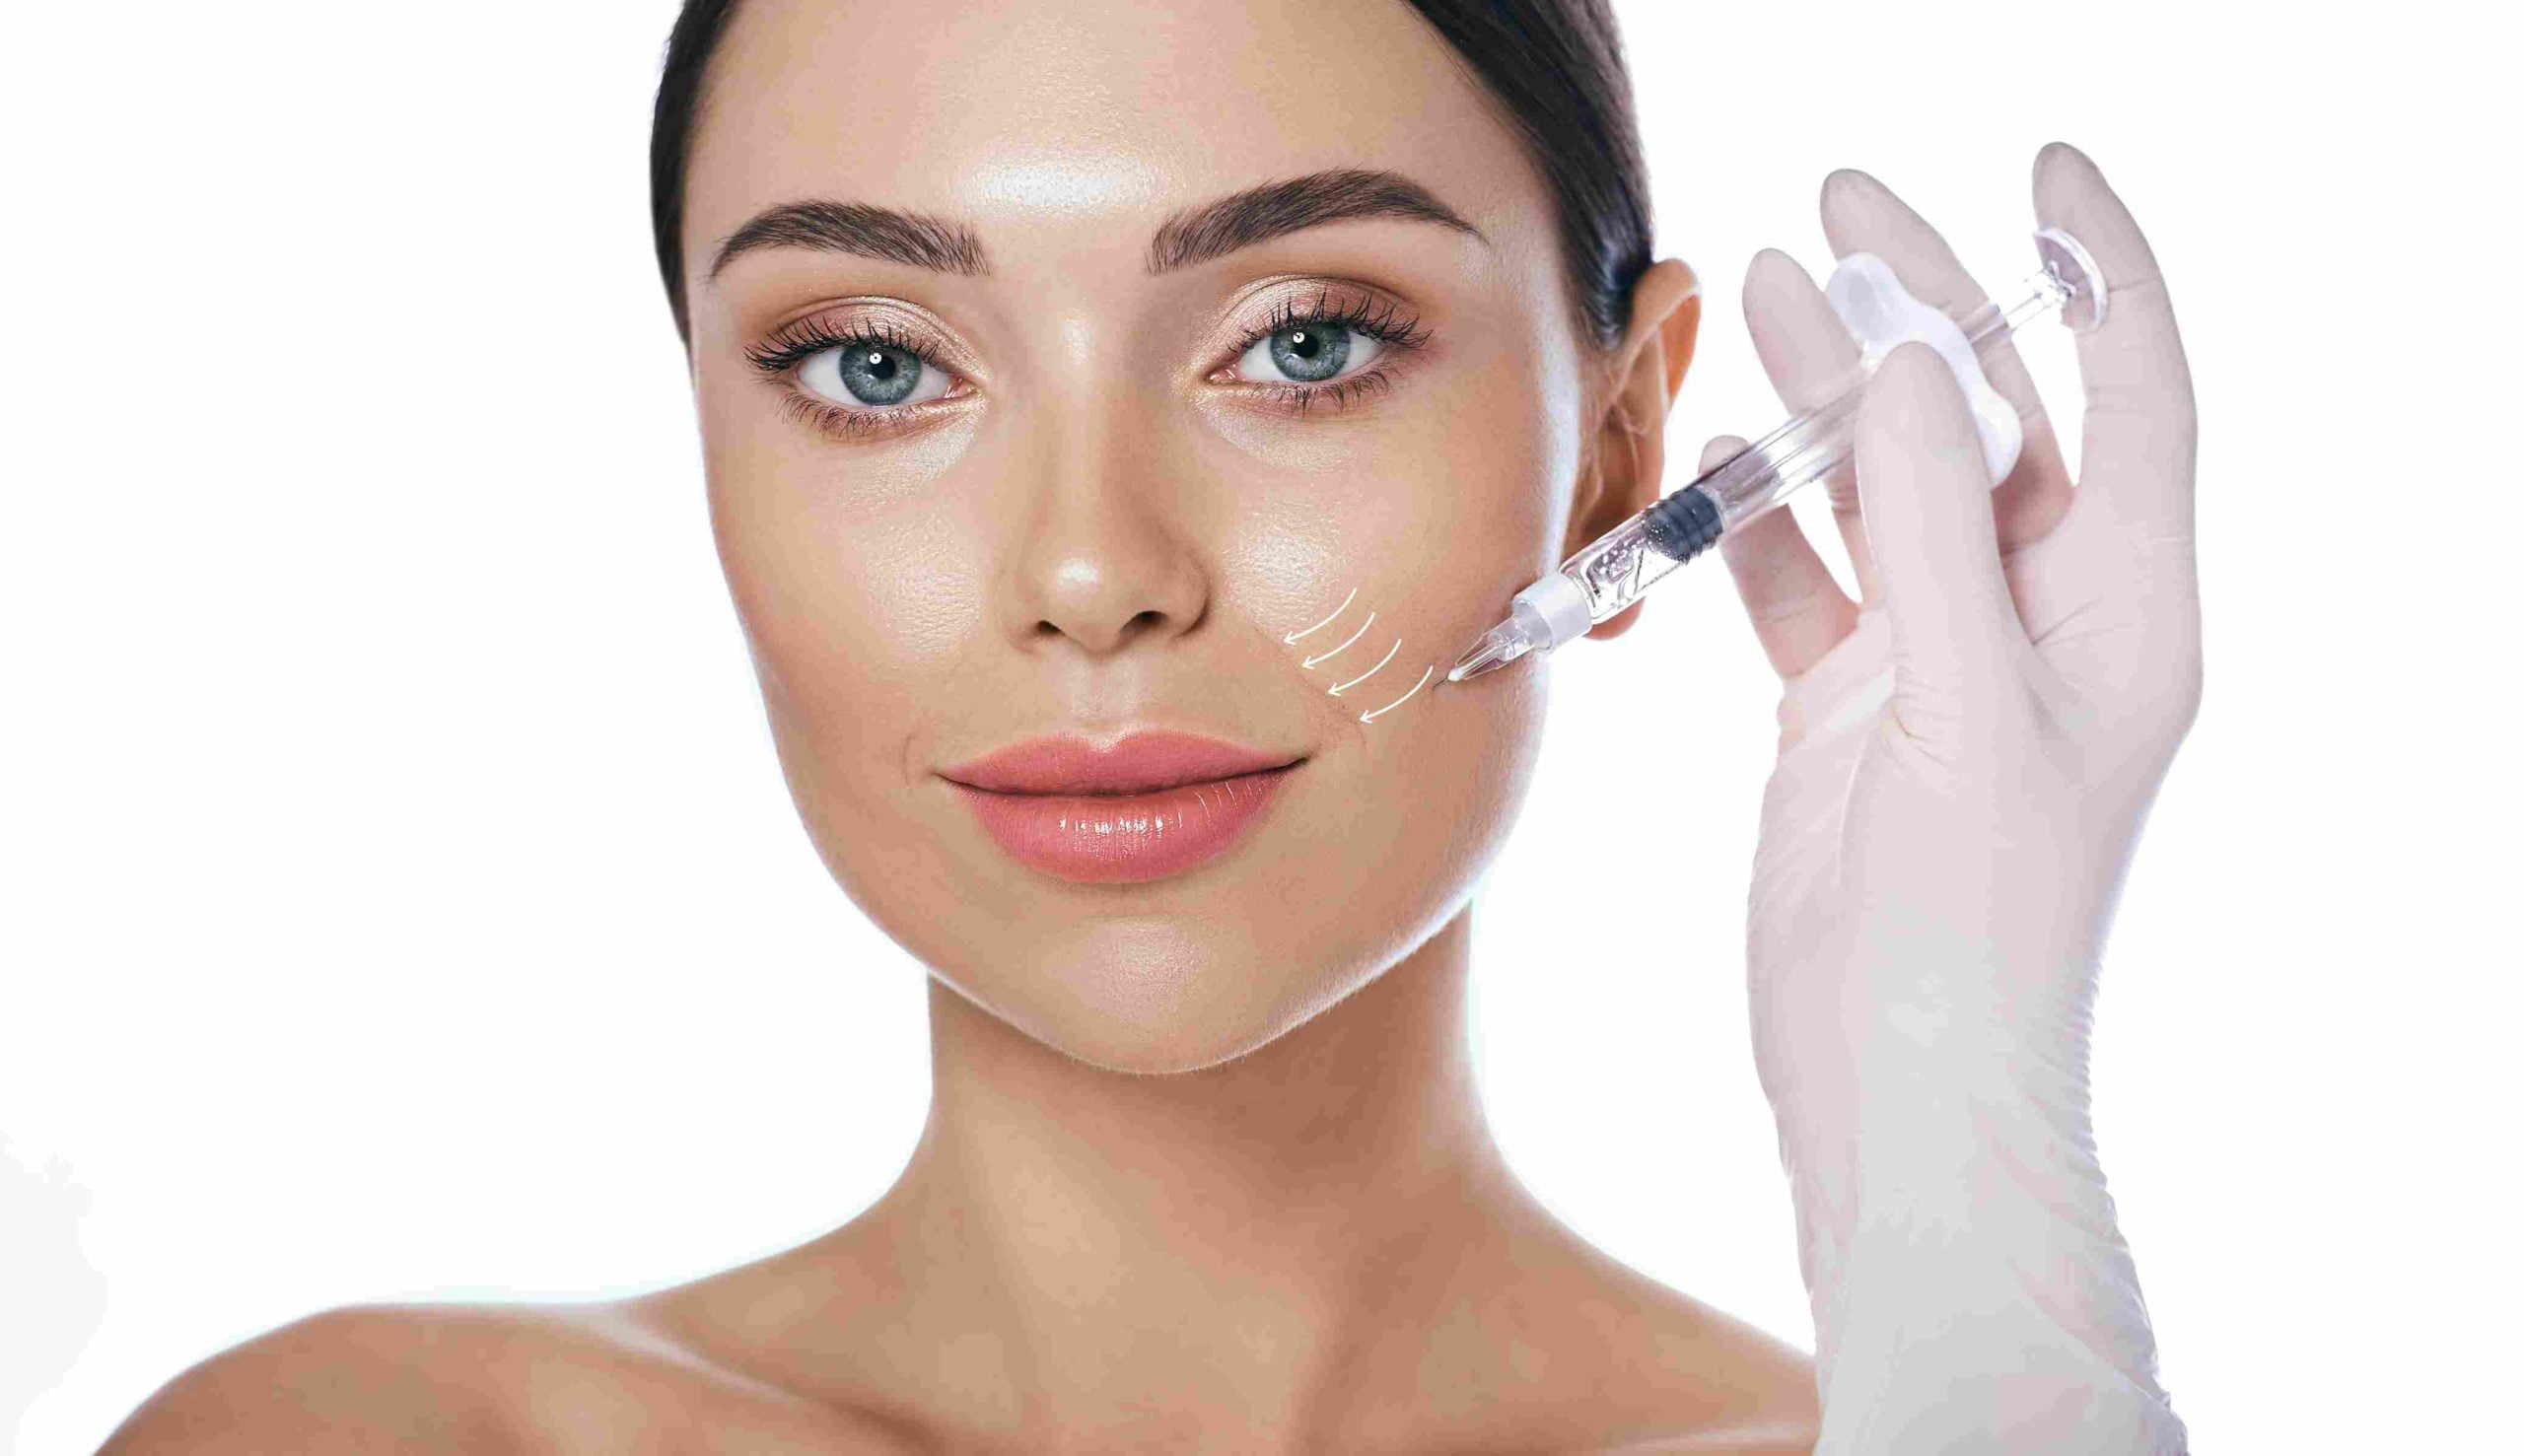 Clear Skin Woman's Face With Lifting Lines On Skin | Avail Aesthetics in Raleigh, NC